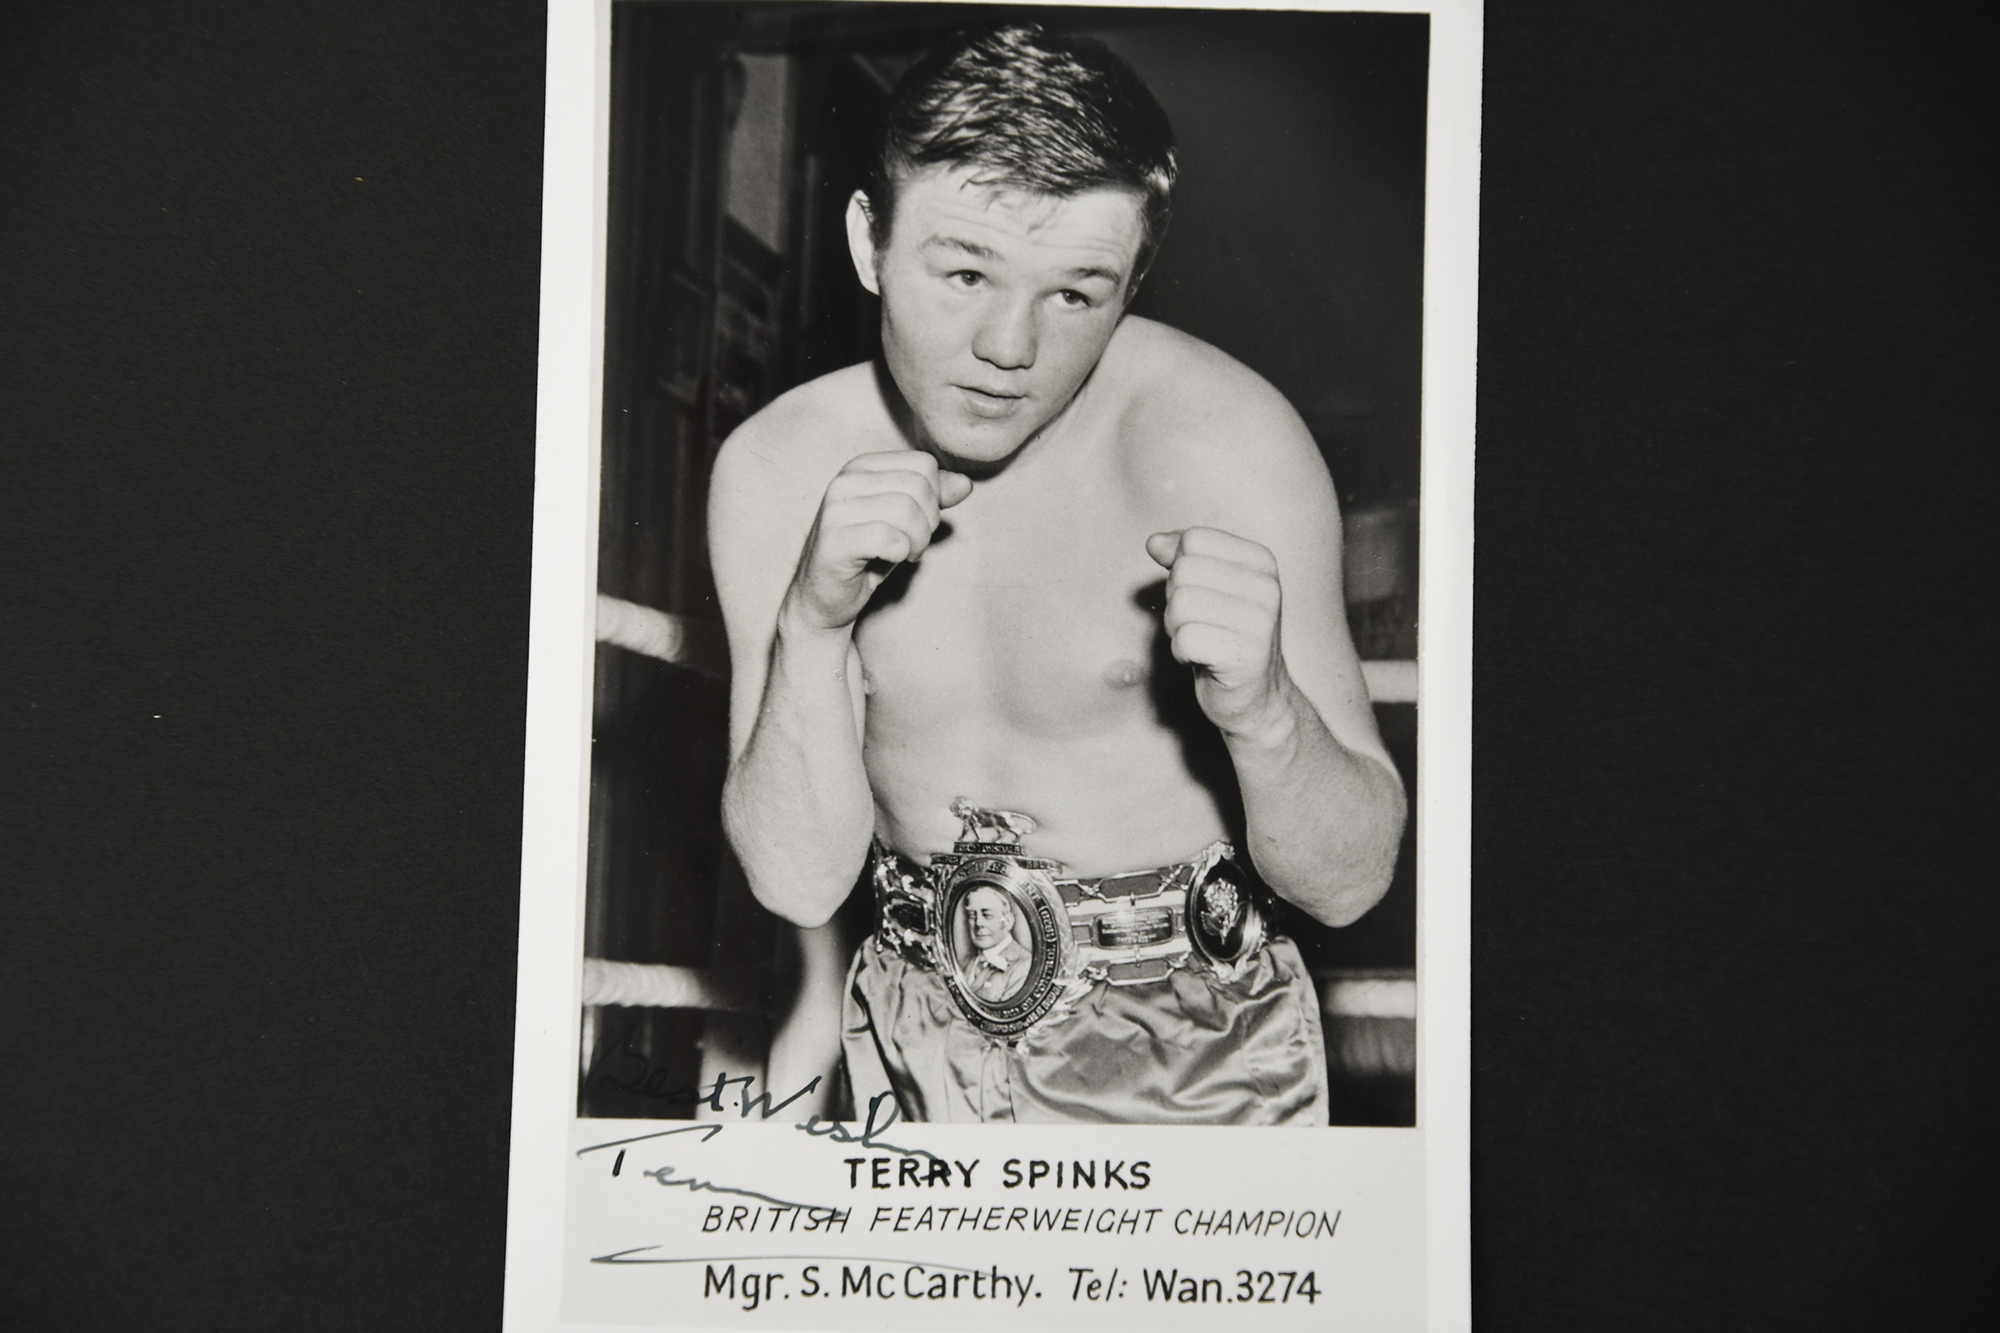 HENRY COOPER & JOE BUGNER etc. Various Boxing cards with original signatures on photo. - Image 10 of 10